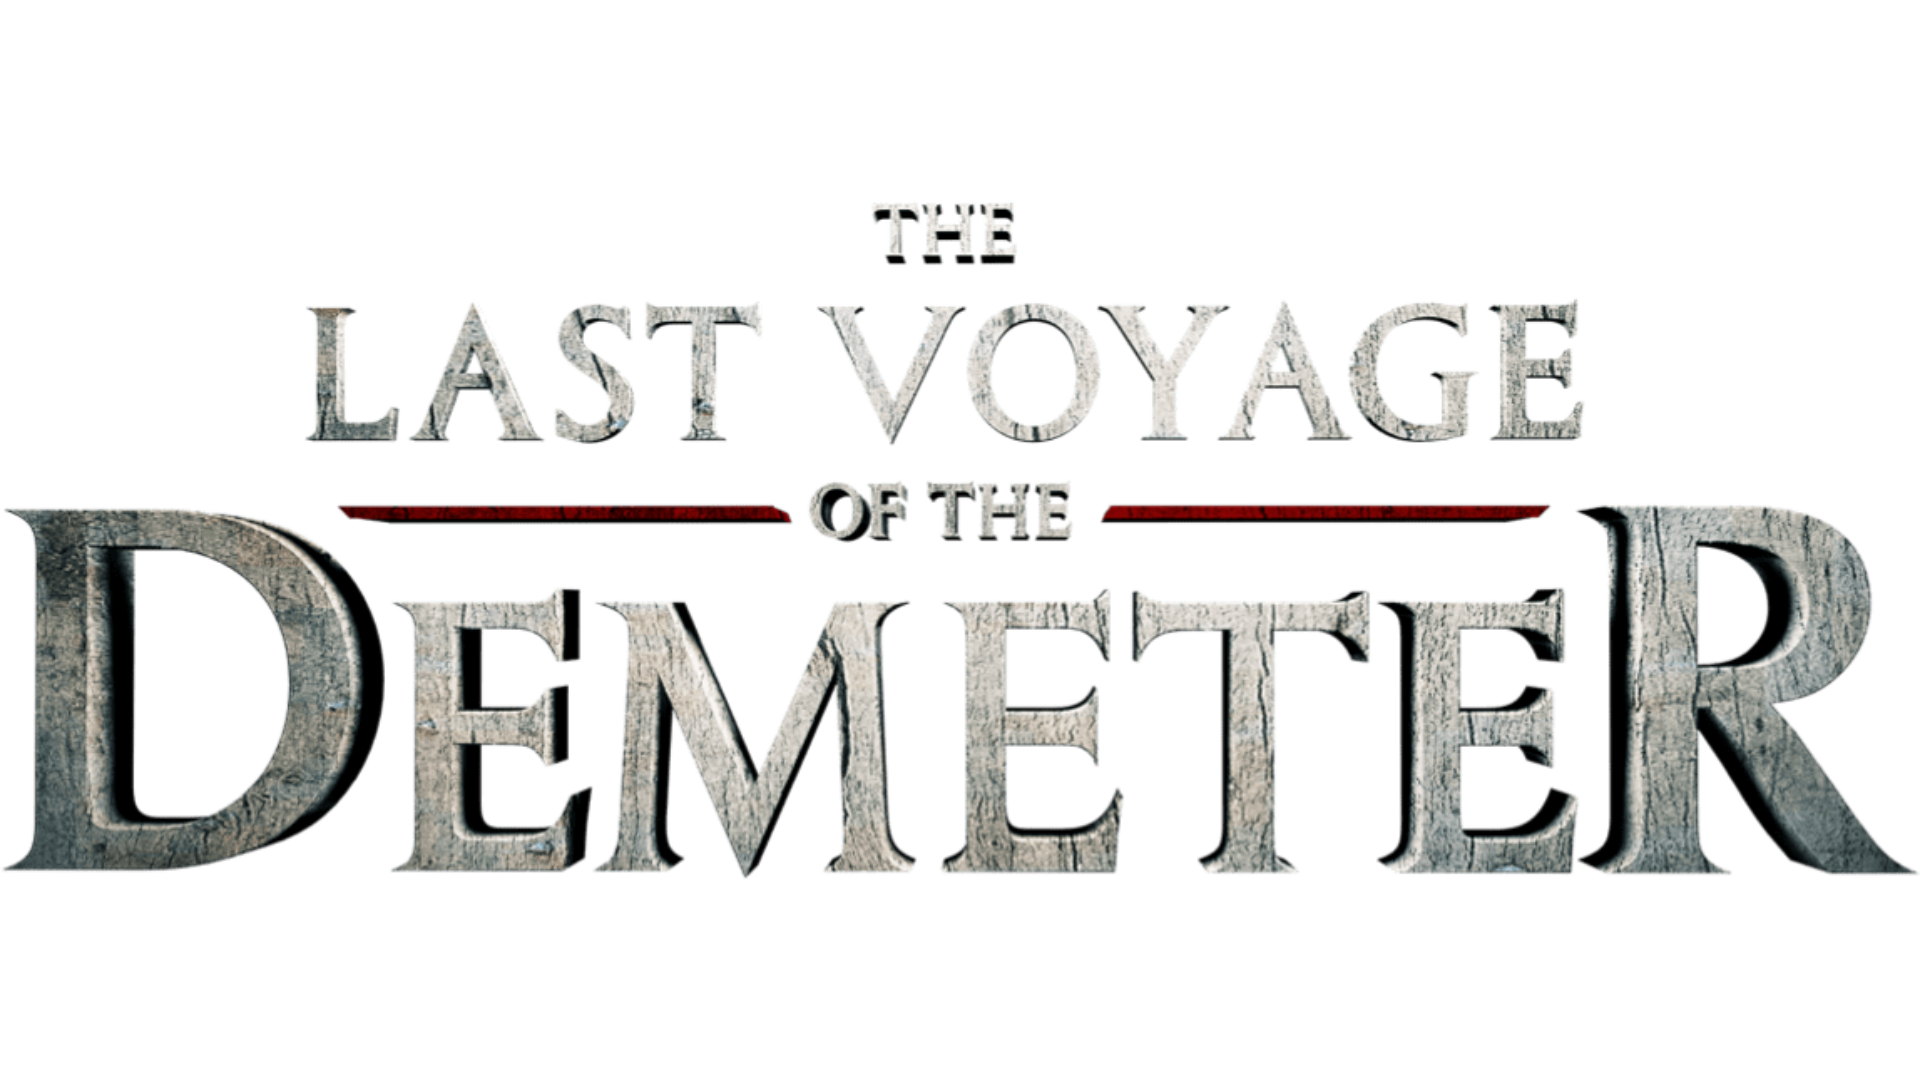 The Making of The Last Voyage of the Demeter